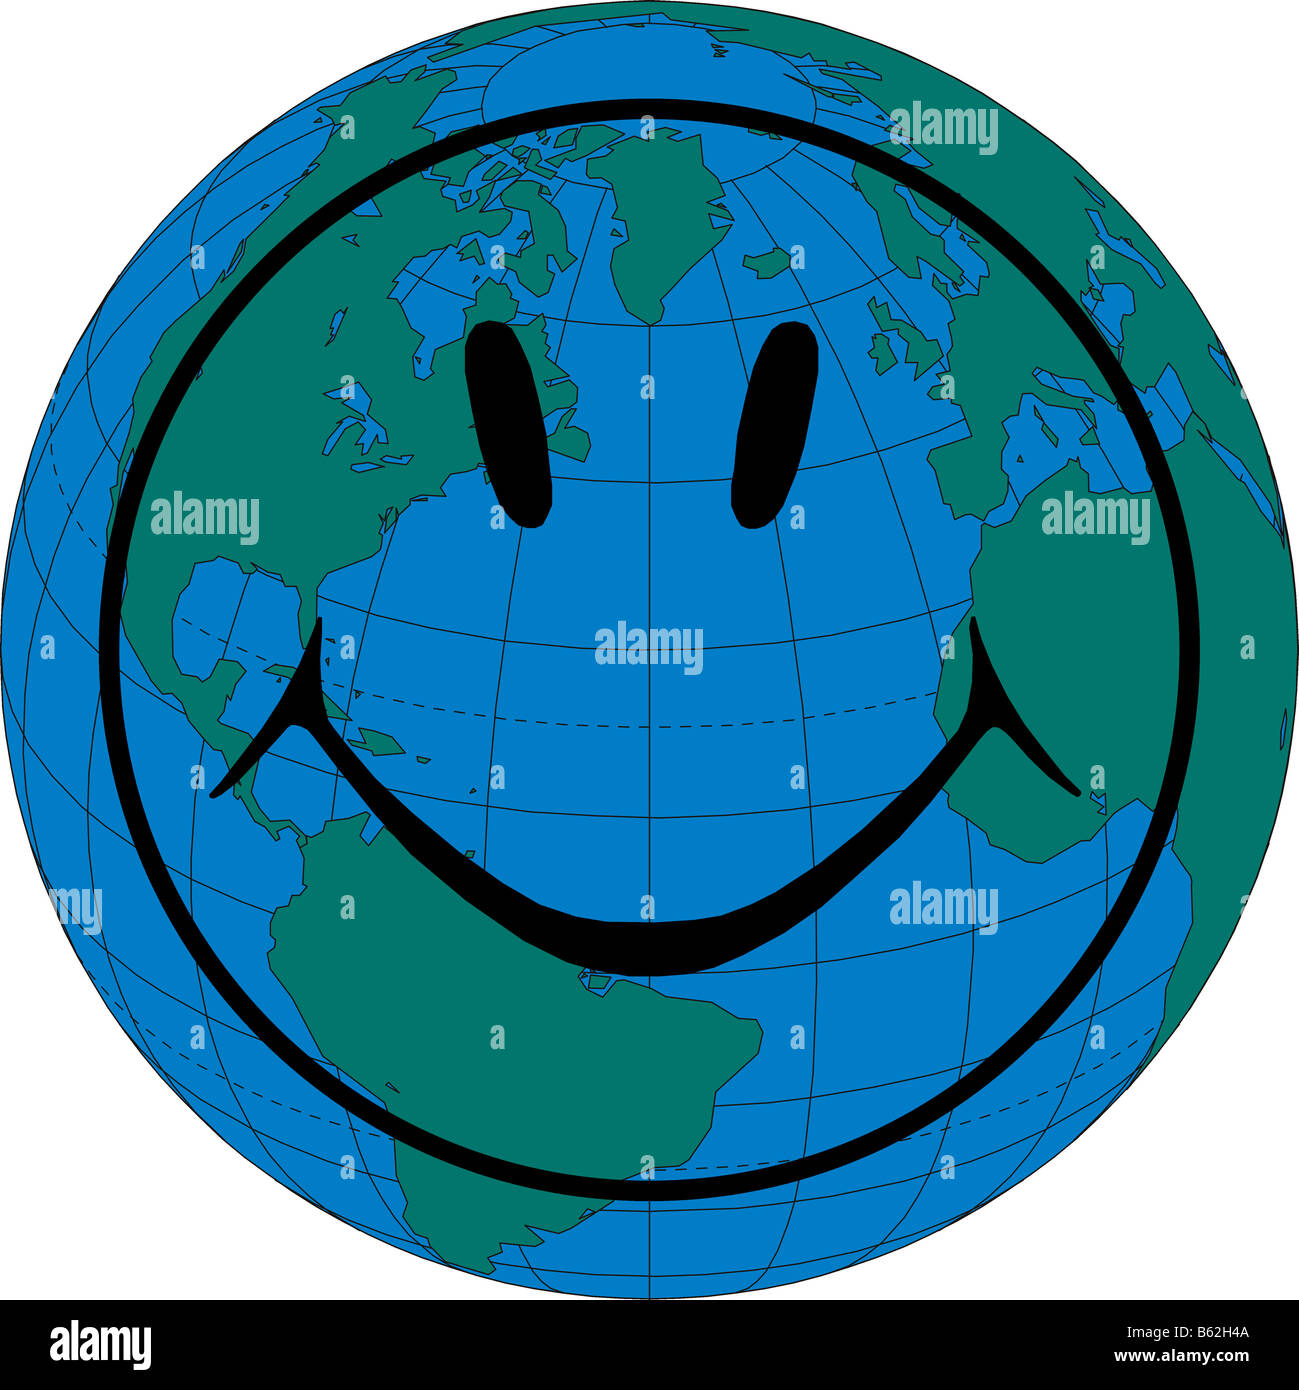 computer generated smiley face on global map Stock Photo